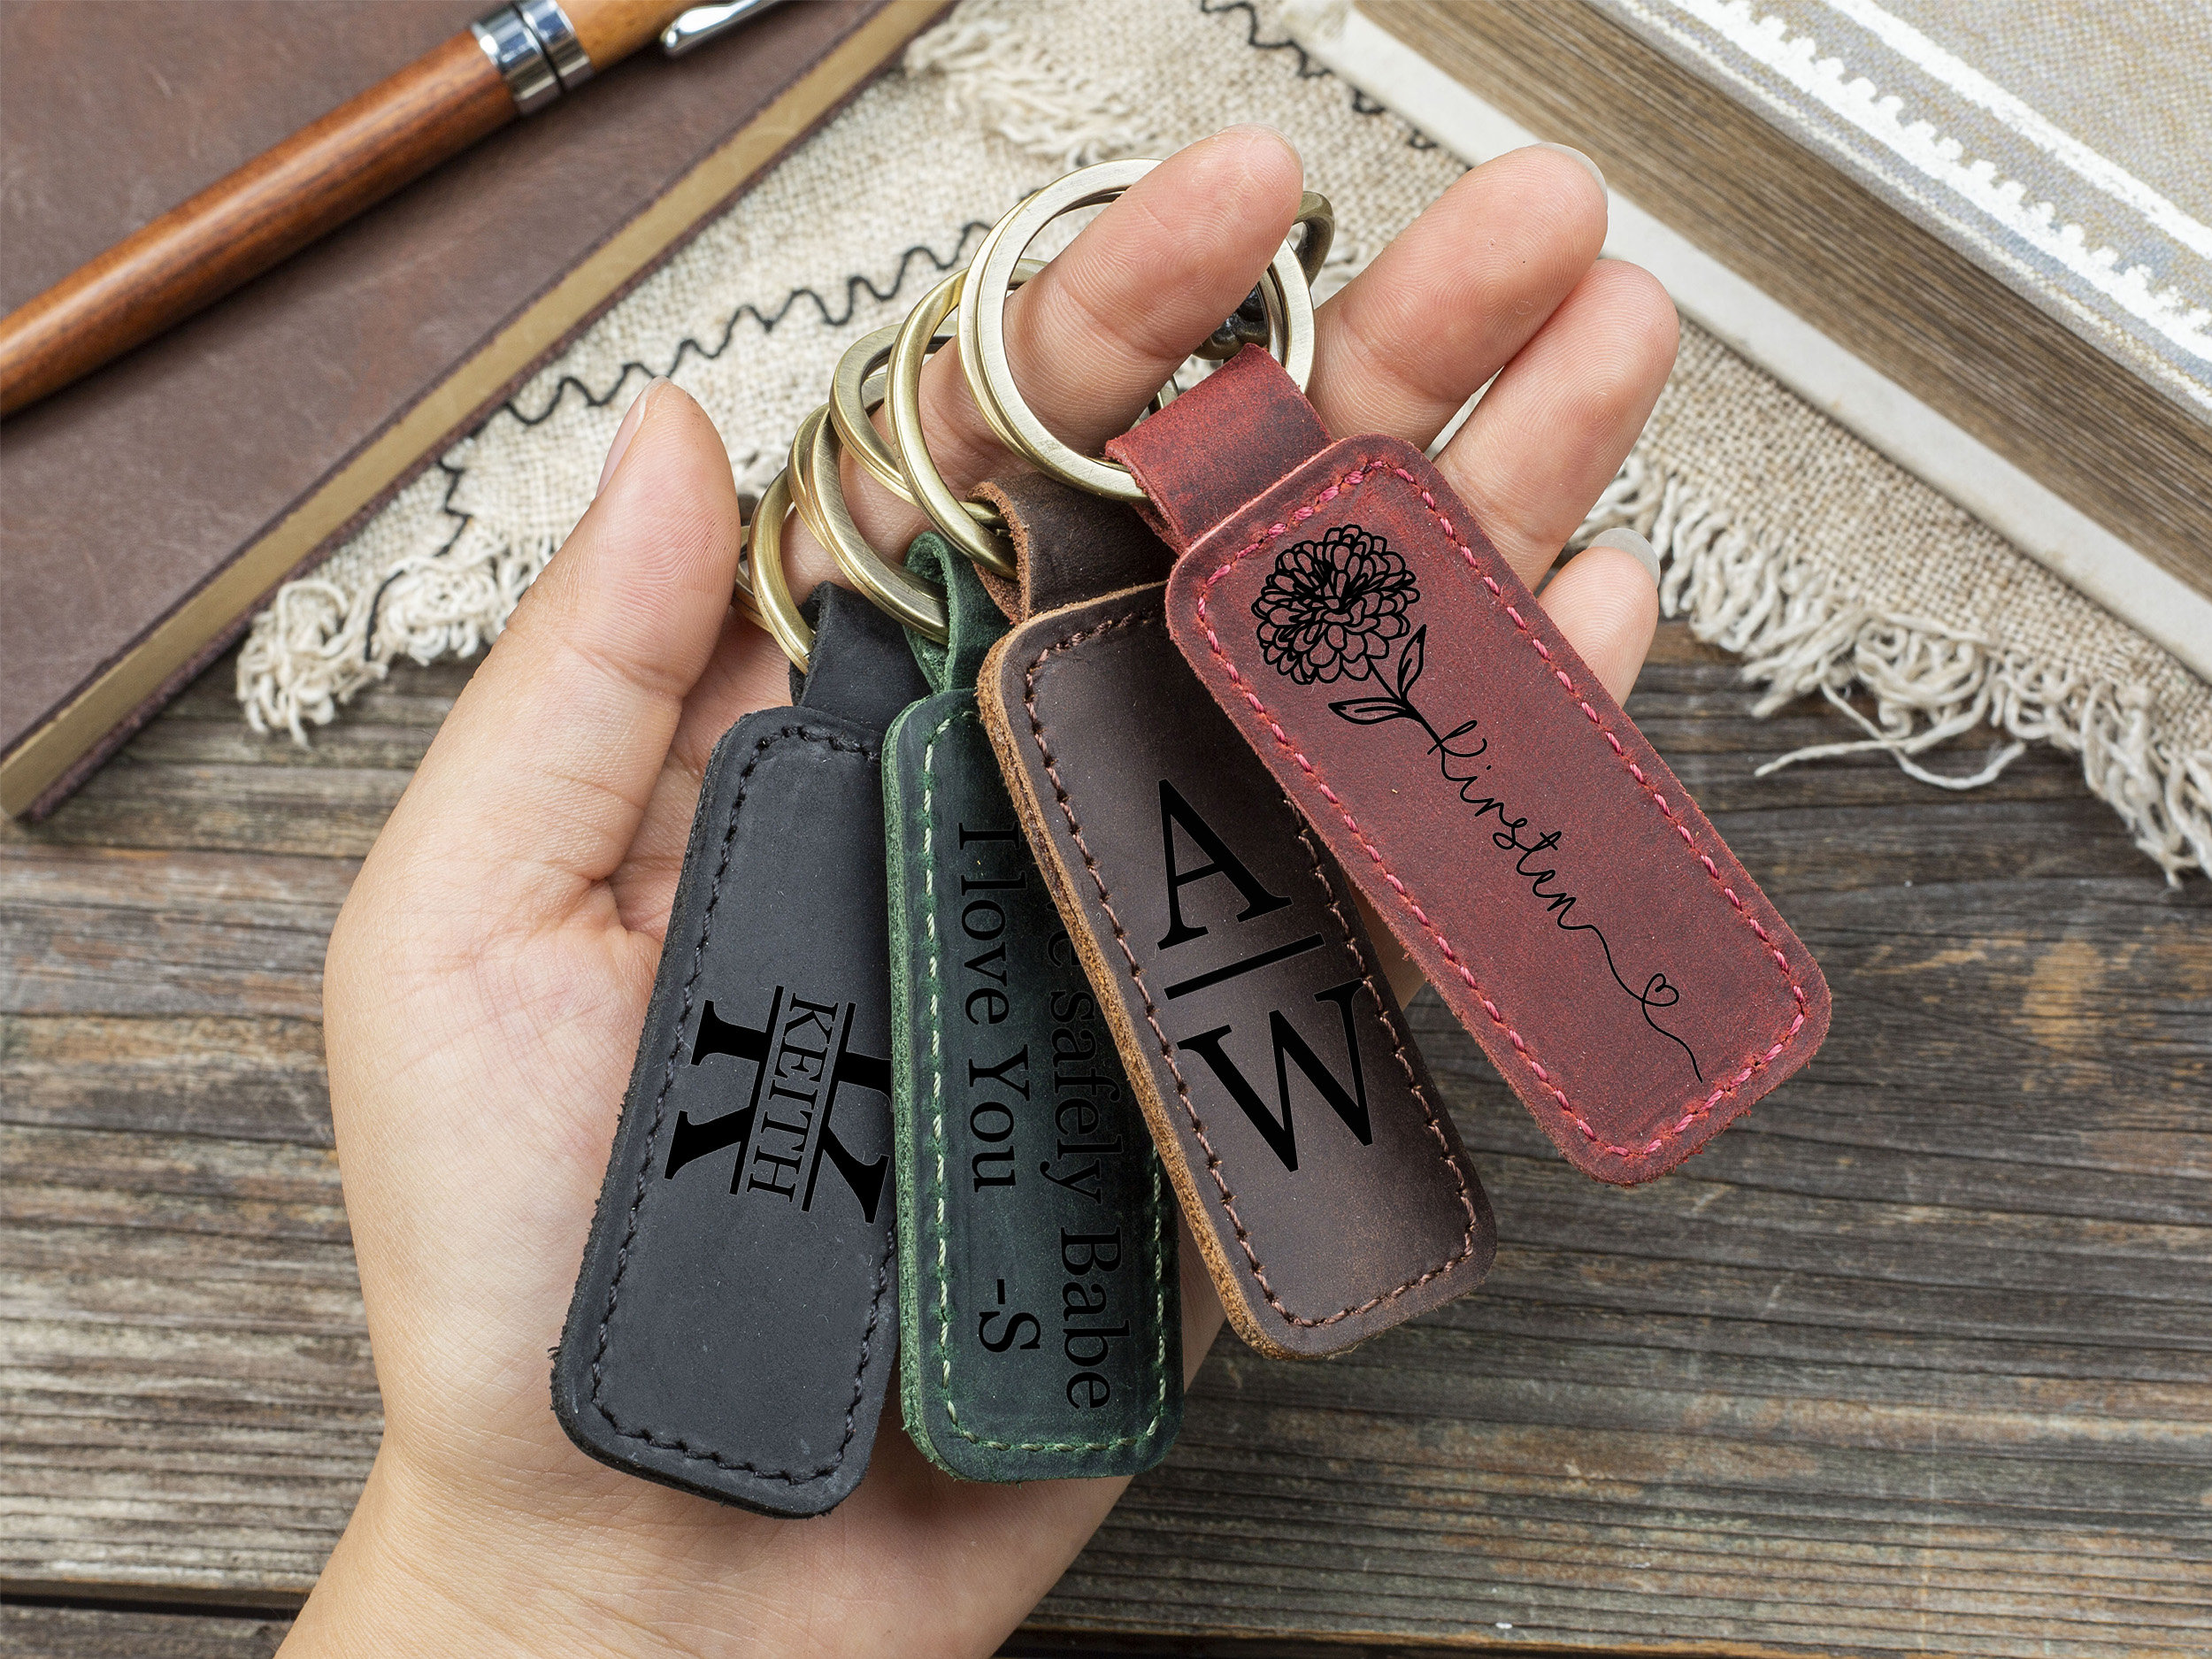 Leather Tactical Keychain, Whiskey, Leather Keychain Strap, Leather Keychain Mens, Leather Keychain for Men, Leather Key Holder, Mission Leather Co